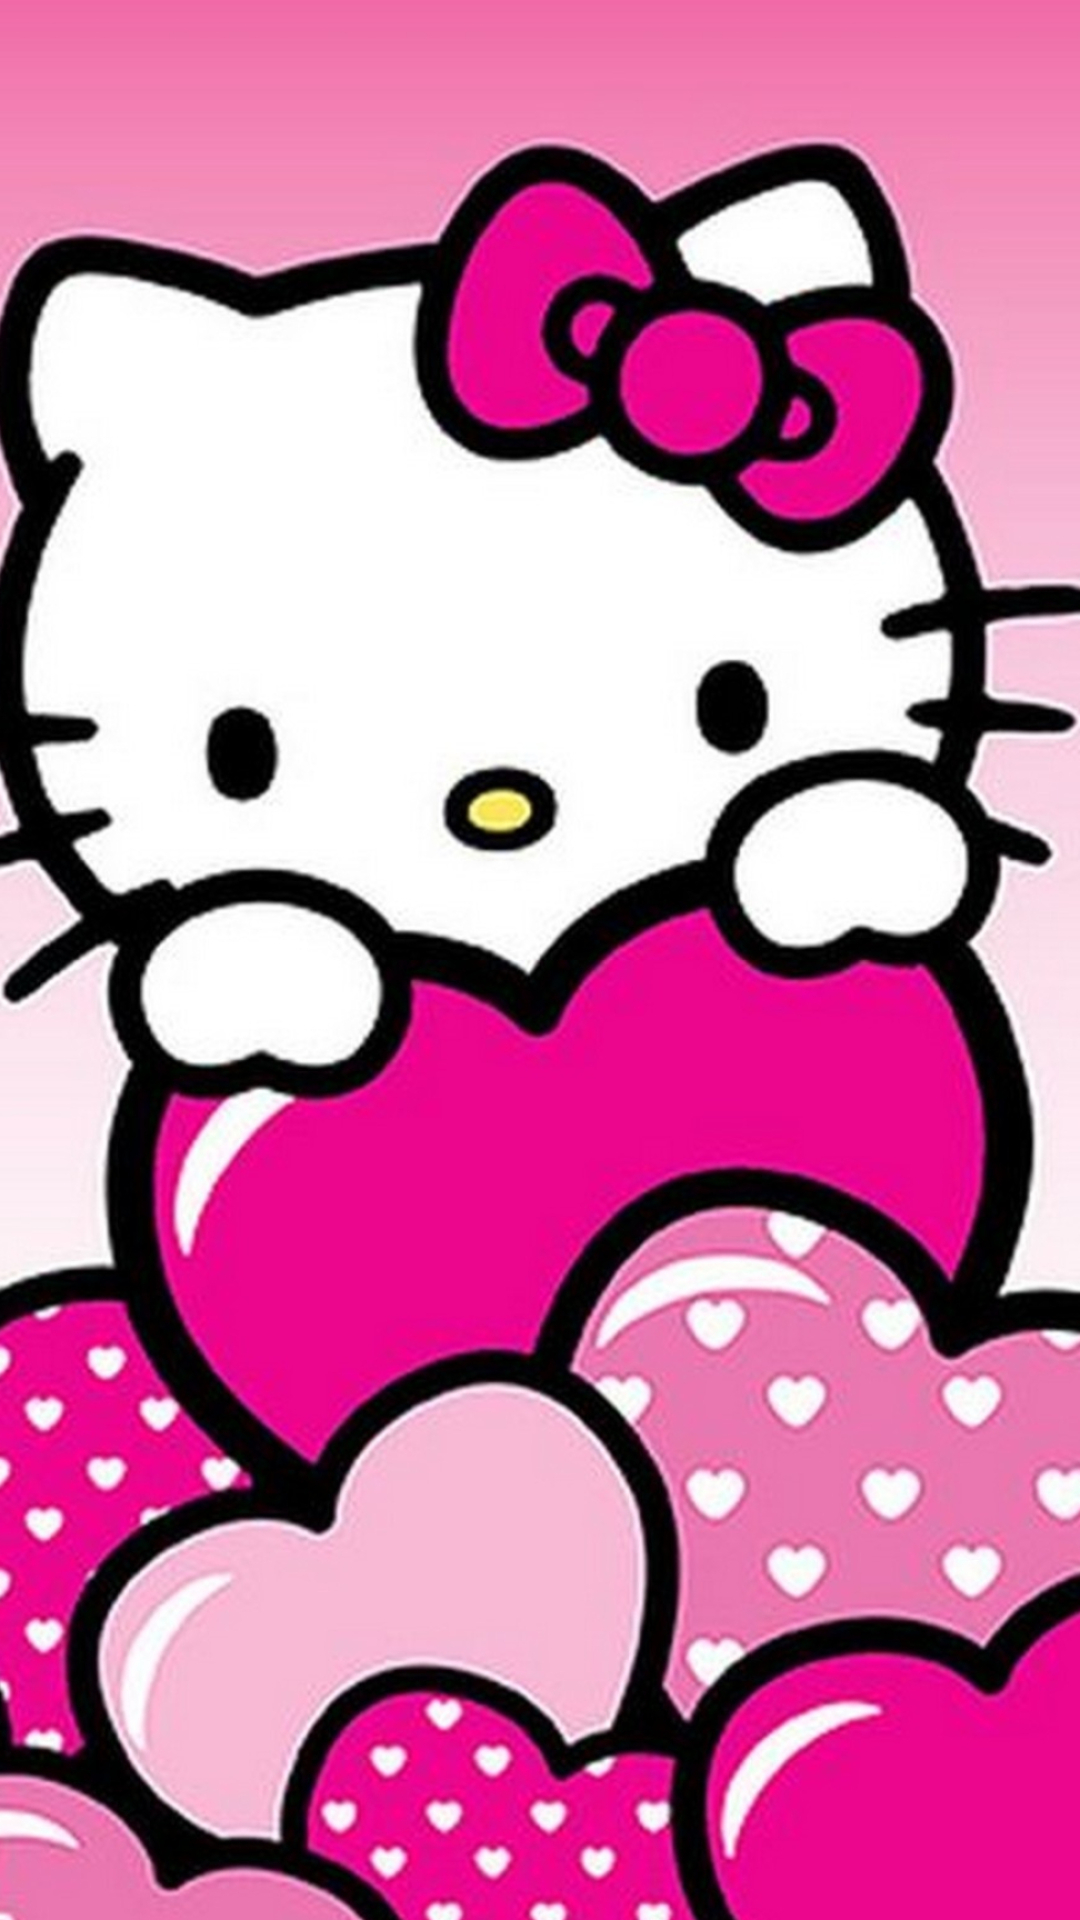 Hello Kitty, Valentine's Day delight, Adorable wallpapers, Love-themed art, 1080x1920 Full HD Phone